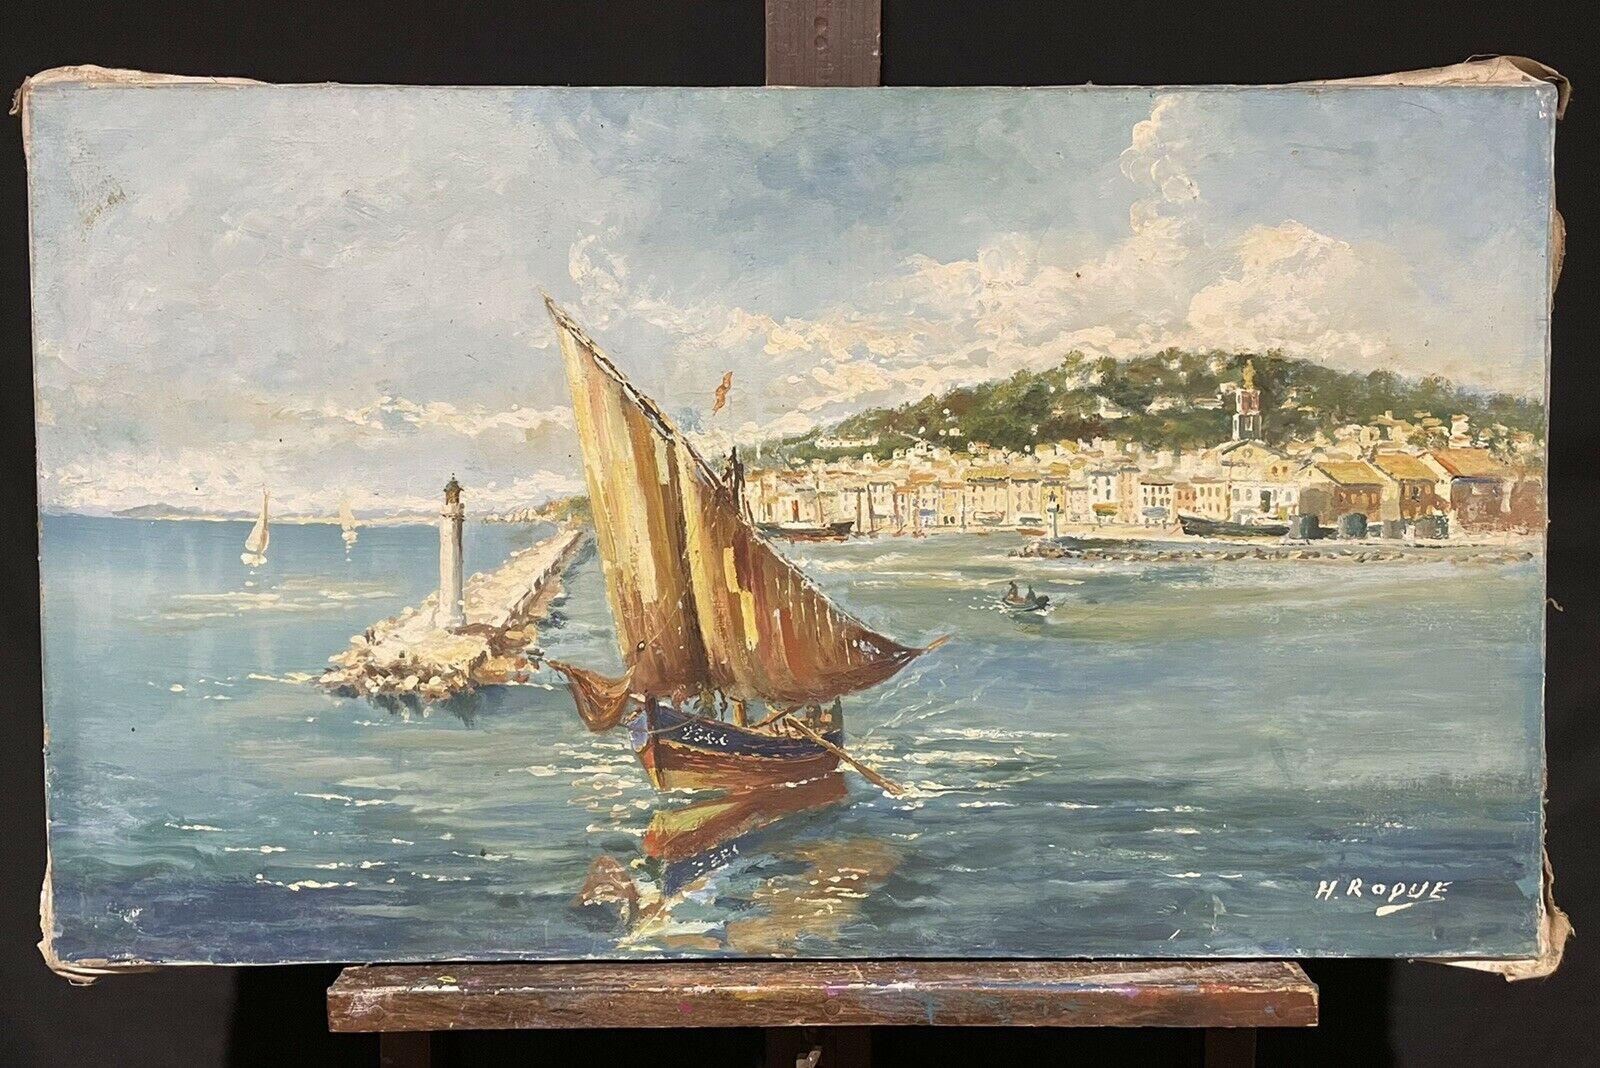 LARGE VINTAGE FRENCH SIGNED OIL - SAILING BOATS ON THE MED FRENCH RIVIERA COAST - Painting by Jason Bentham Dinsdale